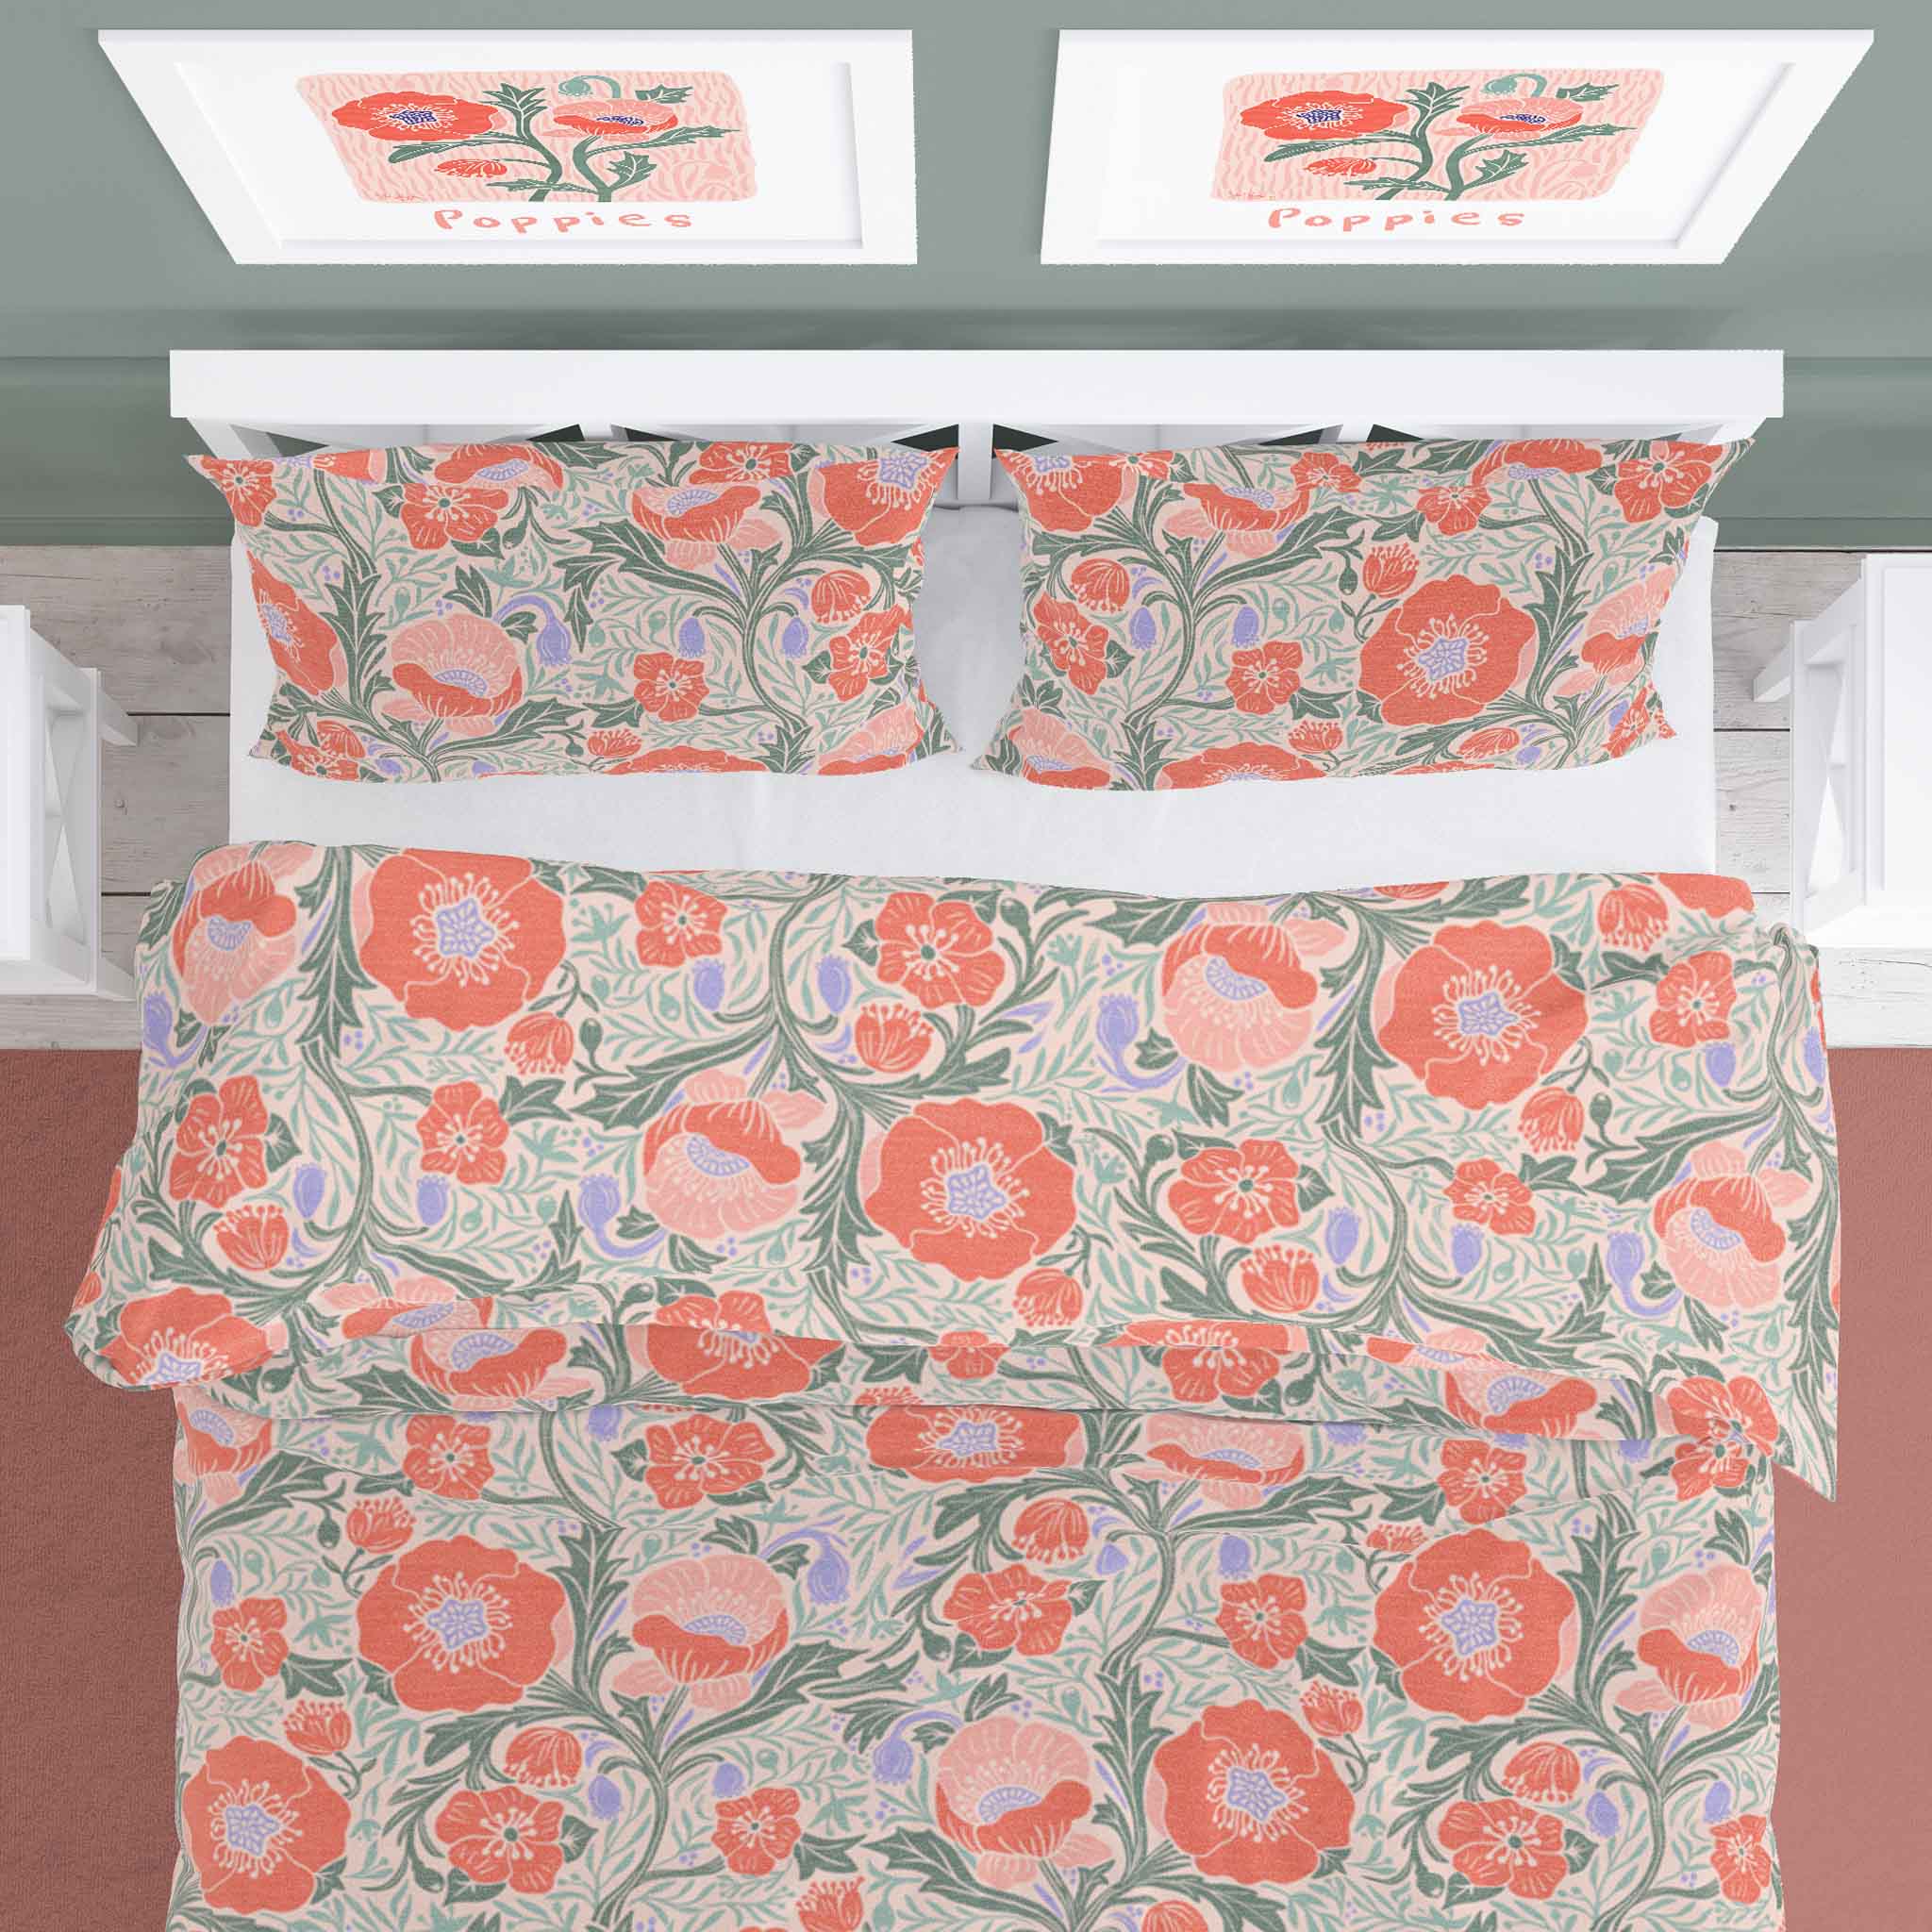 Large bright Poppies on peach background 100% Cotton Duvet Cover